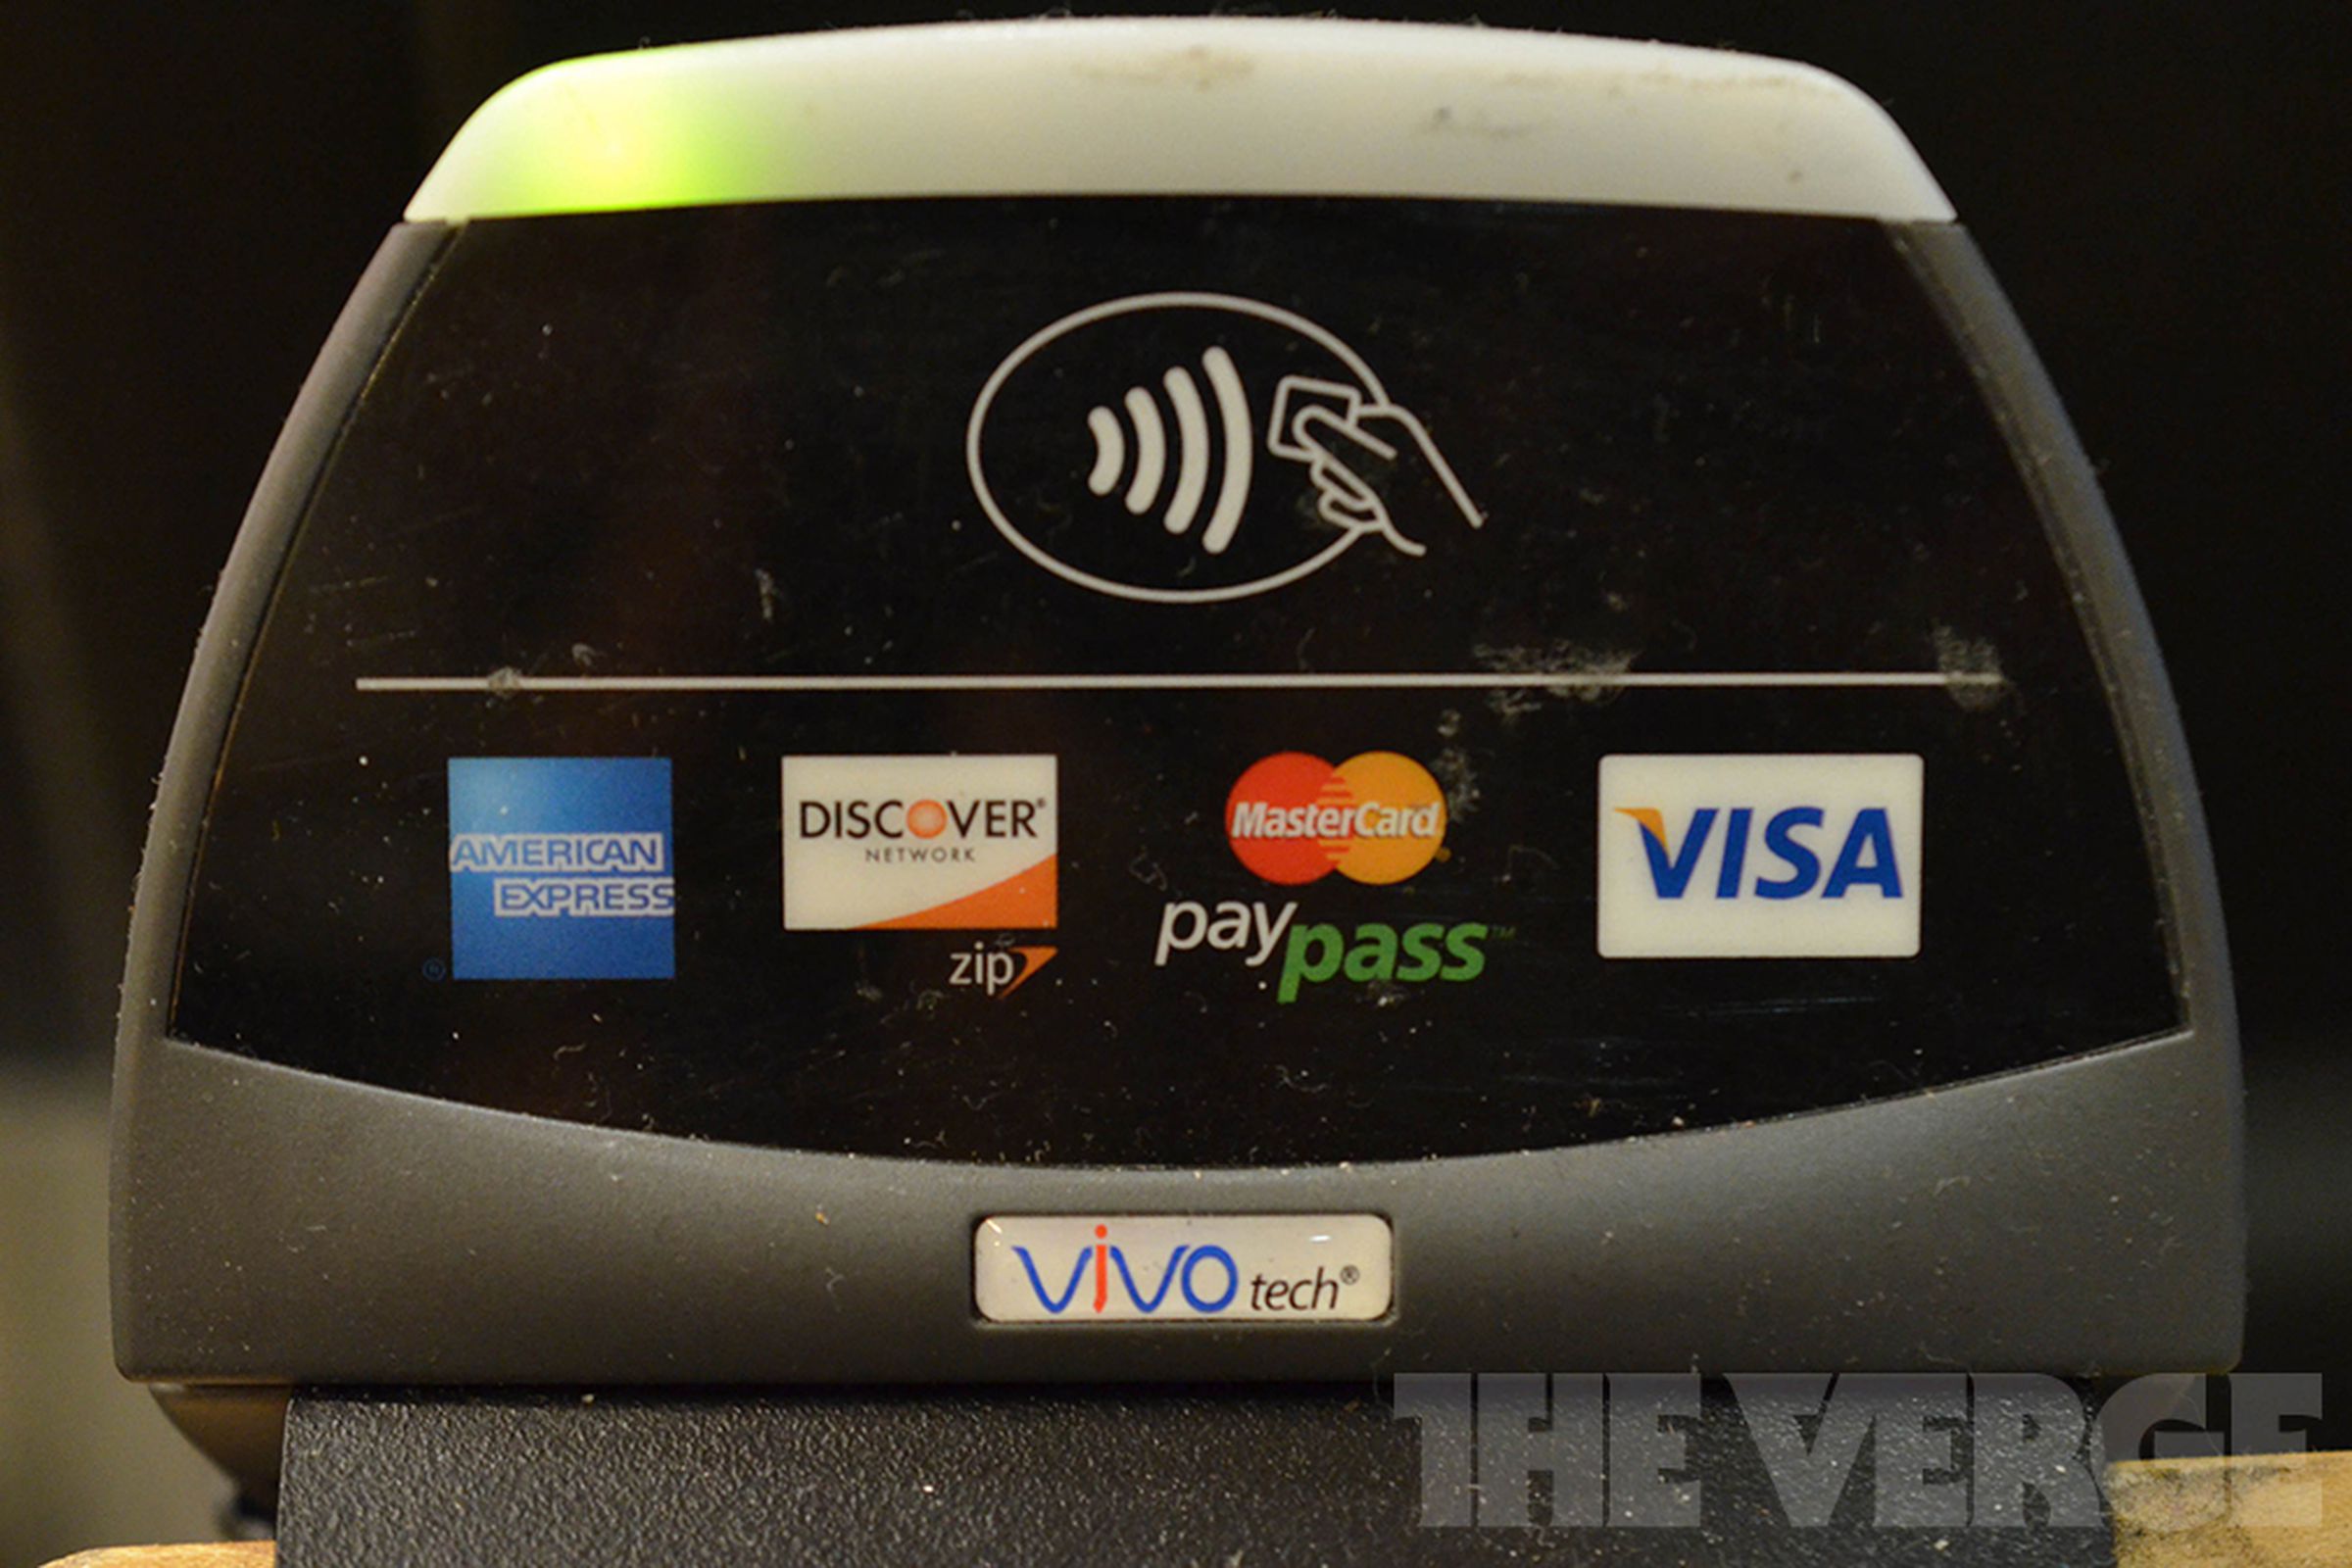 NFC Contactless Payments reciever (1020)